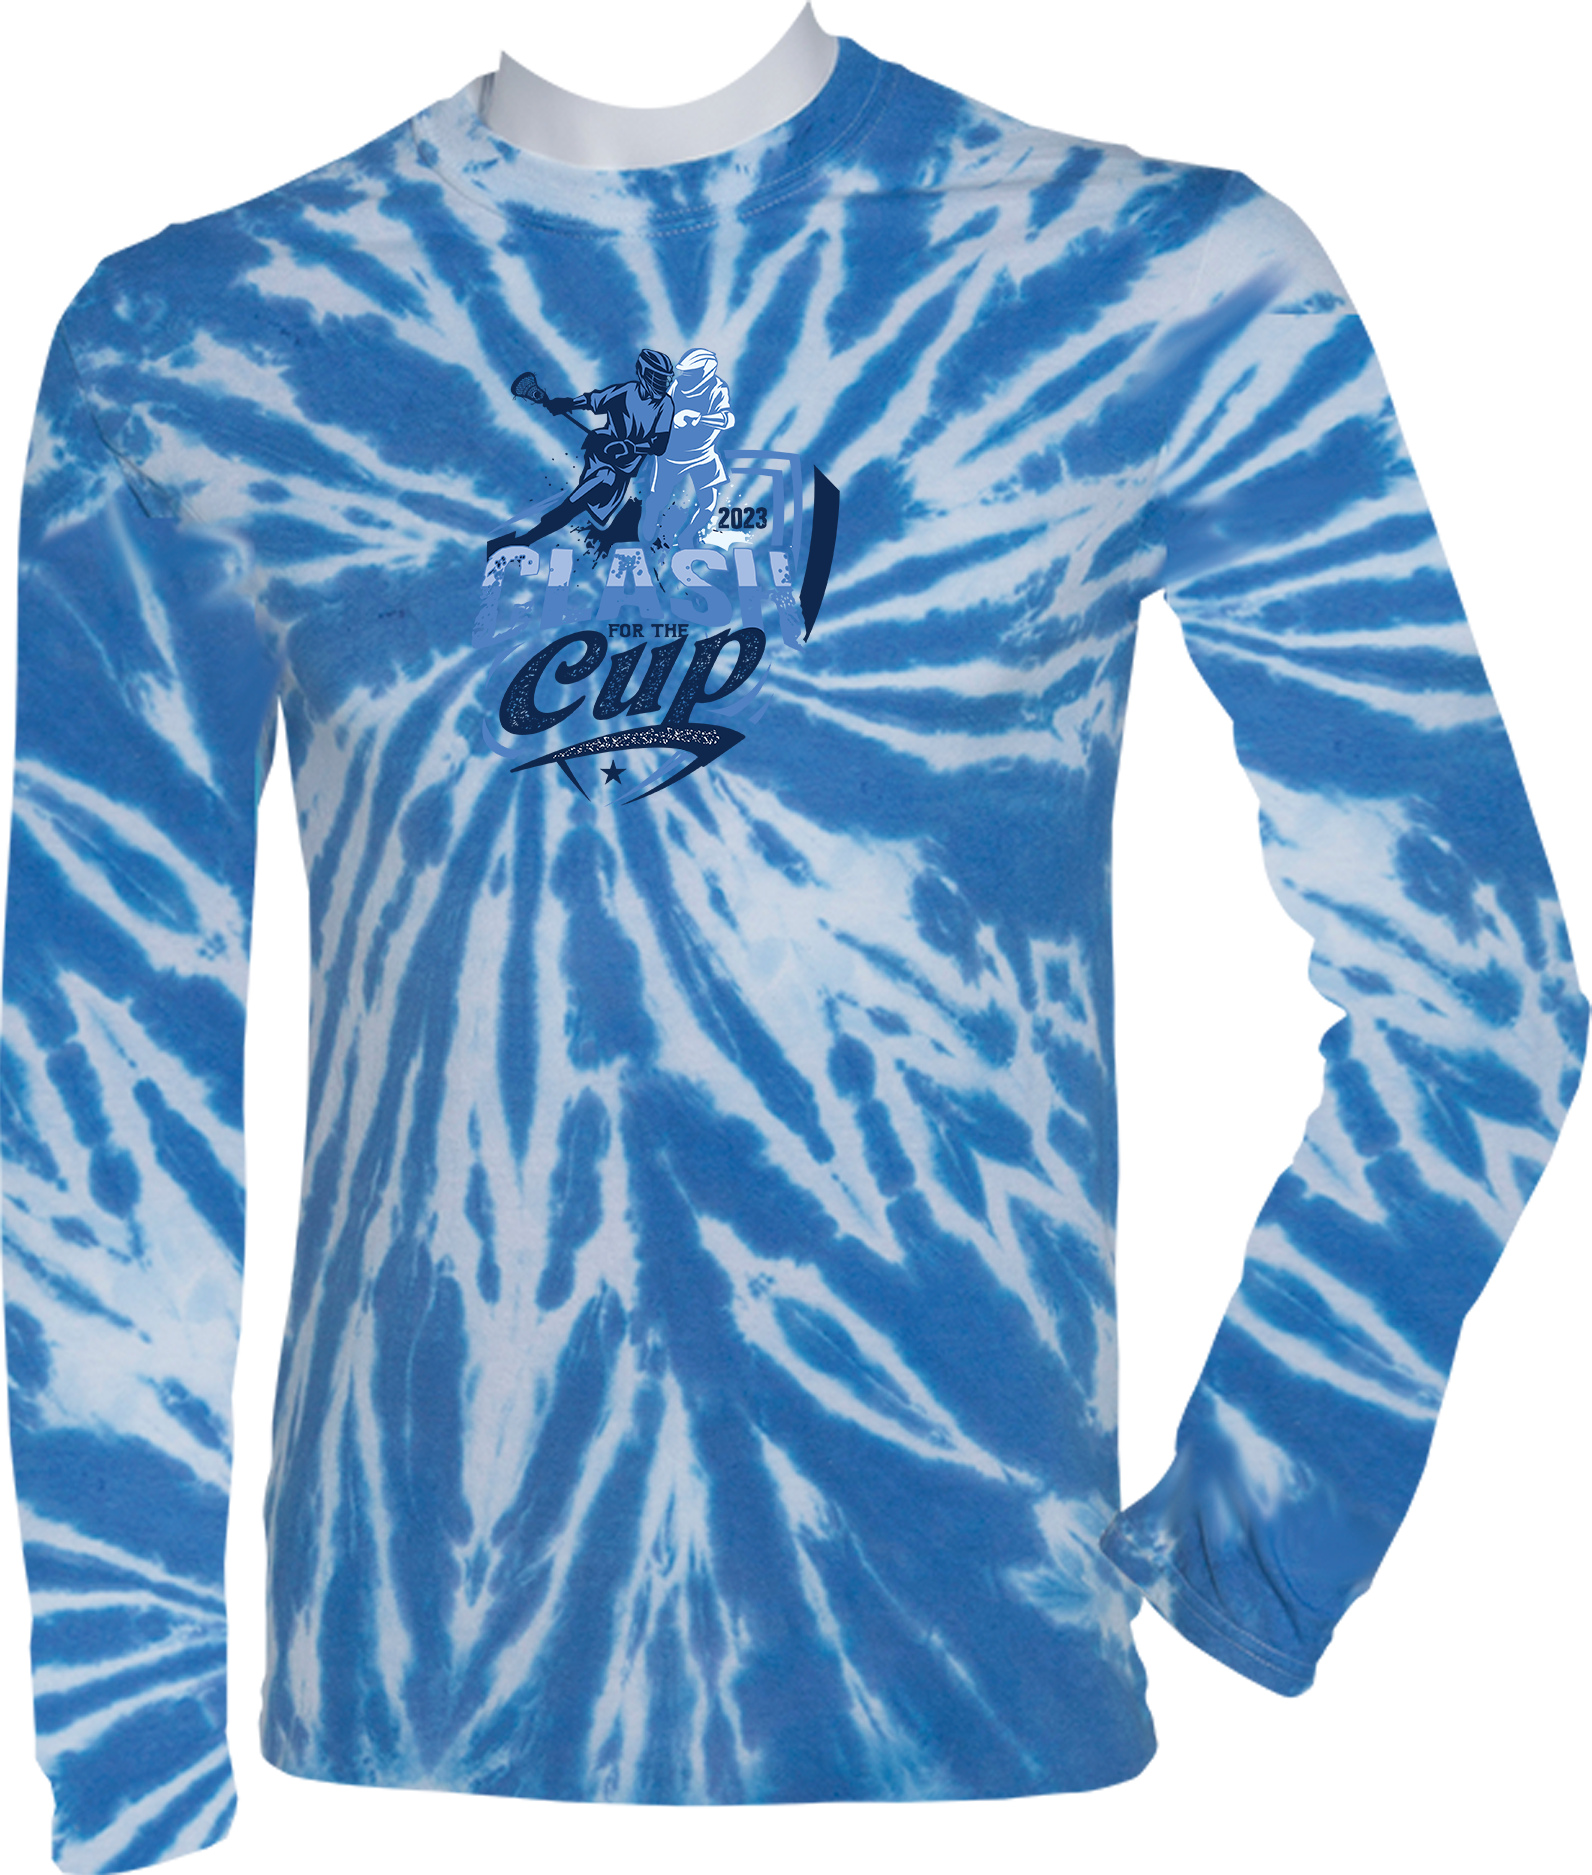 TIE-DYE LONG SLEEVES - 2023 Clash For The Cup